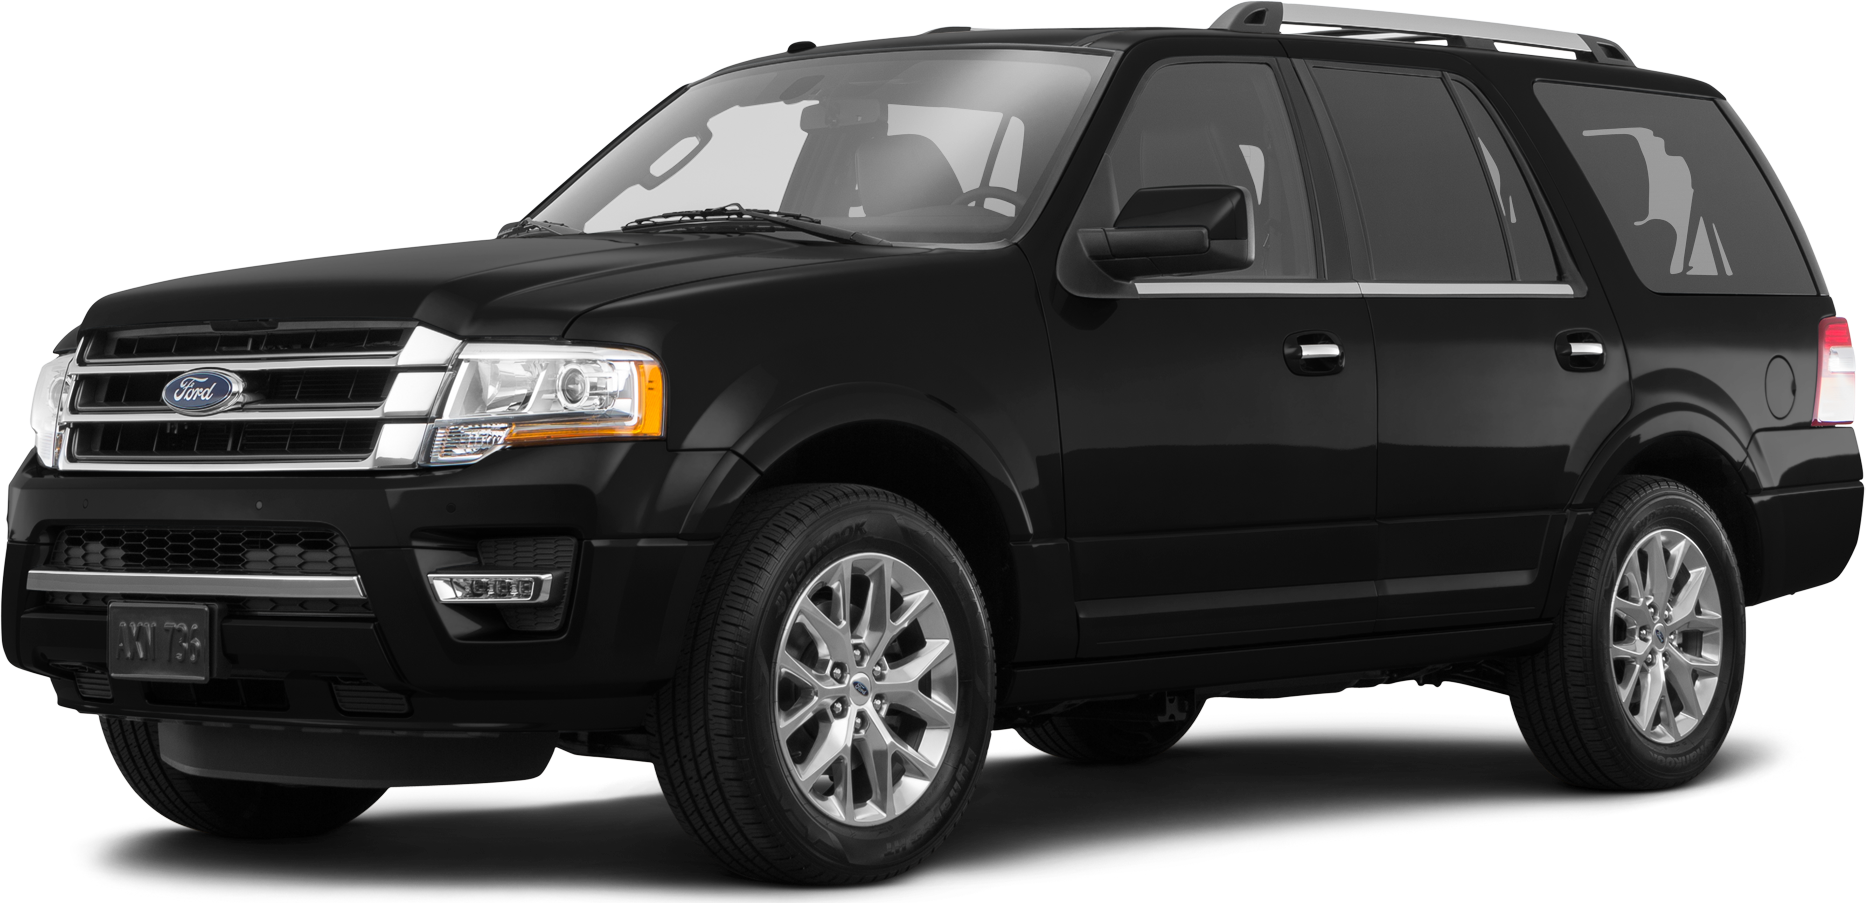 2017 Ford Expedition Value